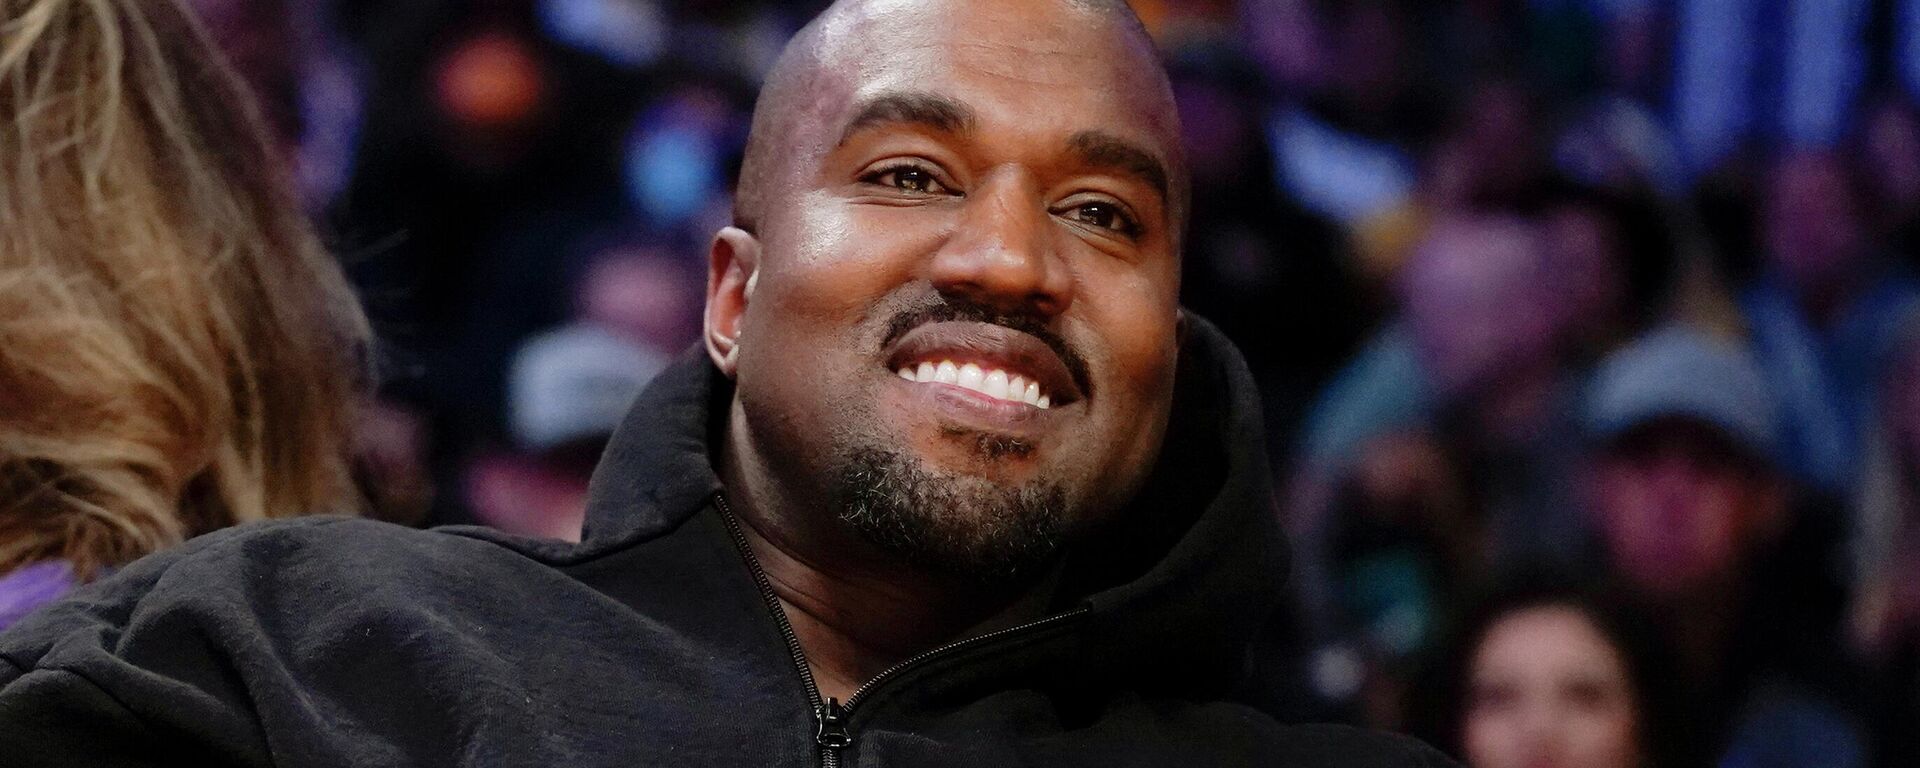 FILE - Kanye West watches the first half of an NBA basketball game between the Washington Wizards and the Los Angeles Lakers in Los Angeles, on March 11, 2022 A completed documentary about the rapper formerly known as Kanye West has been shelved amid his recent slew of antisemitic remark - Sputnik International, 1920, 06.12.2022